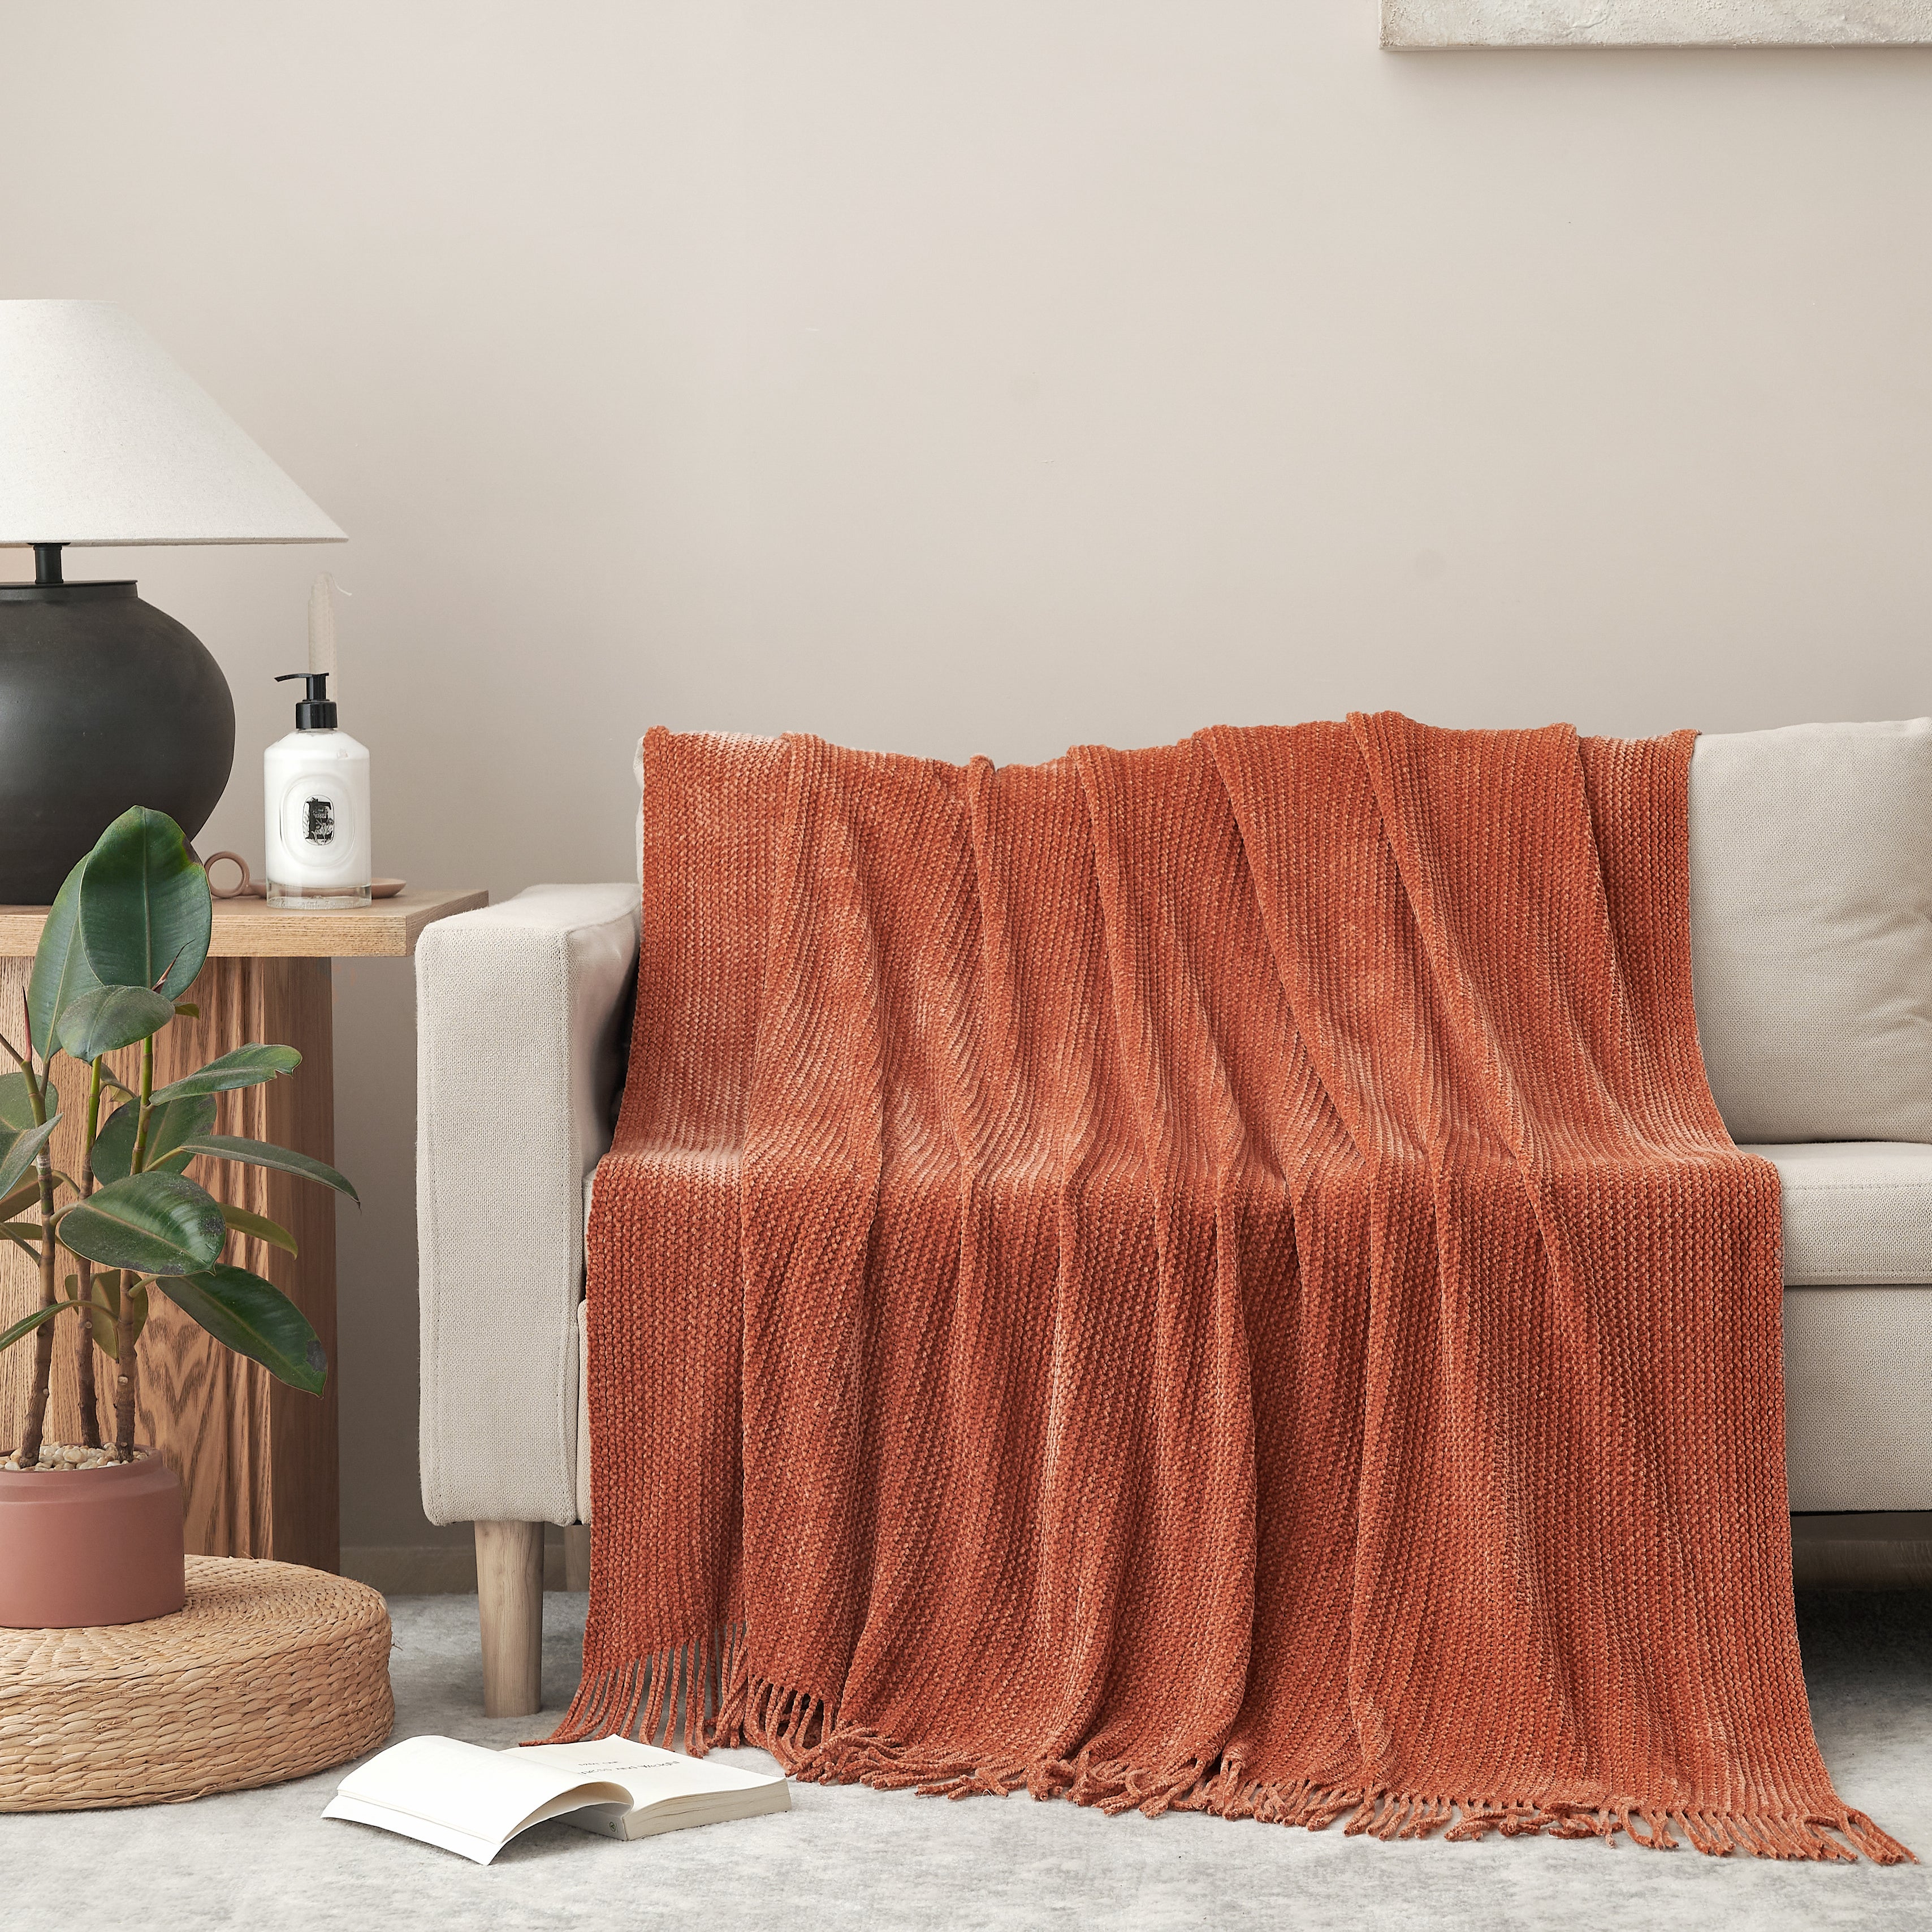 Ultra Soft and Cozy Chenille Throw Blanket with Fringes, 50 x 60 inches